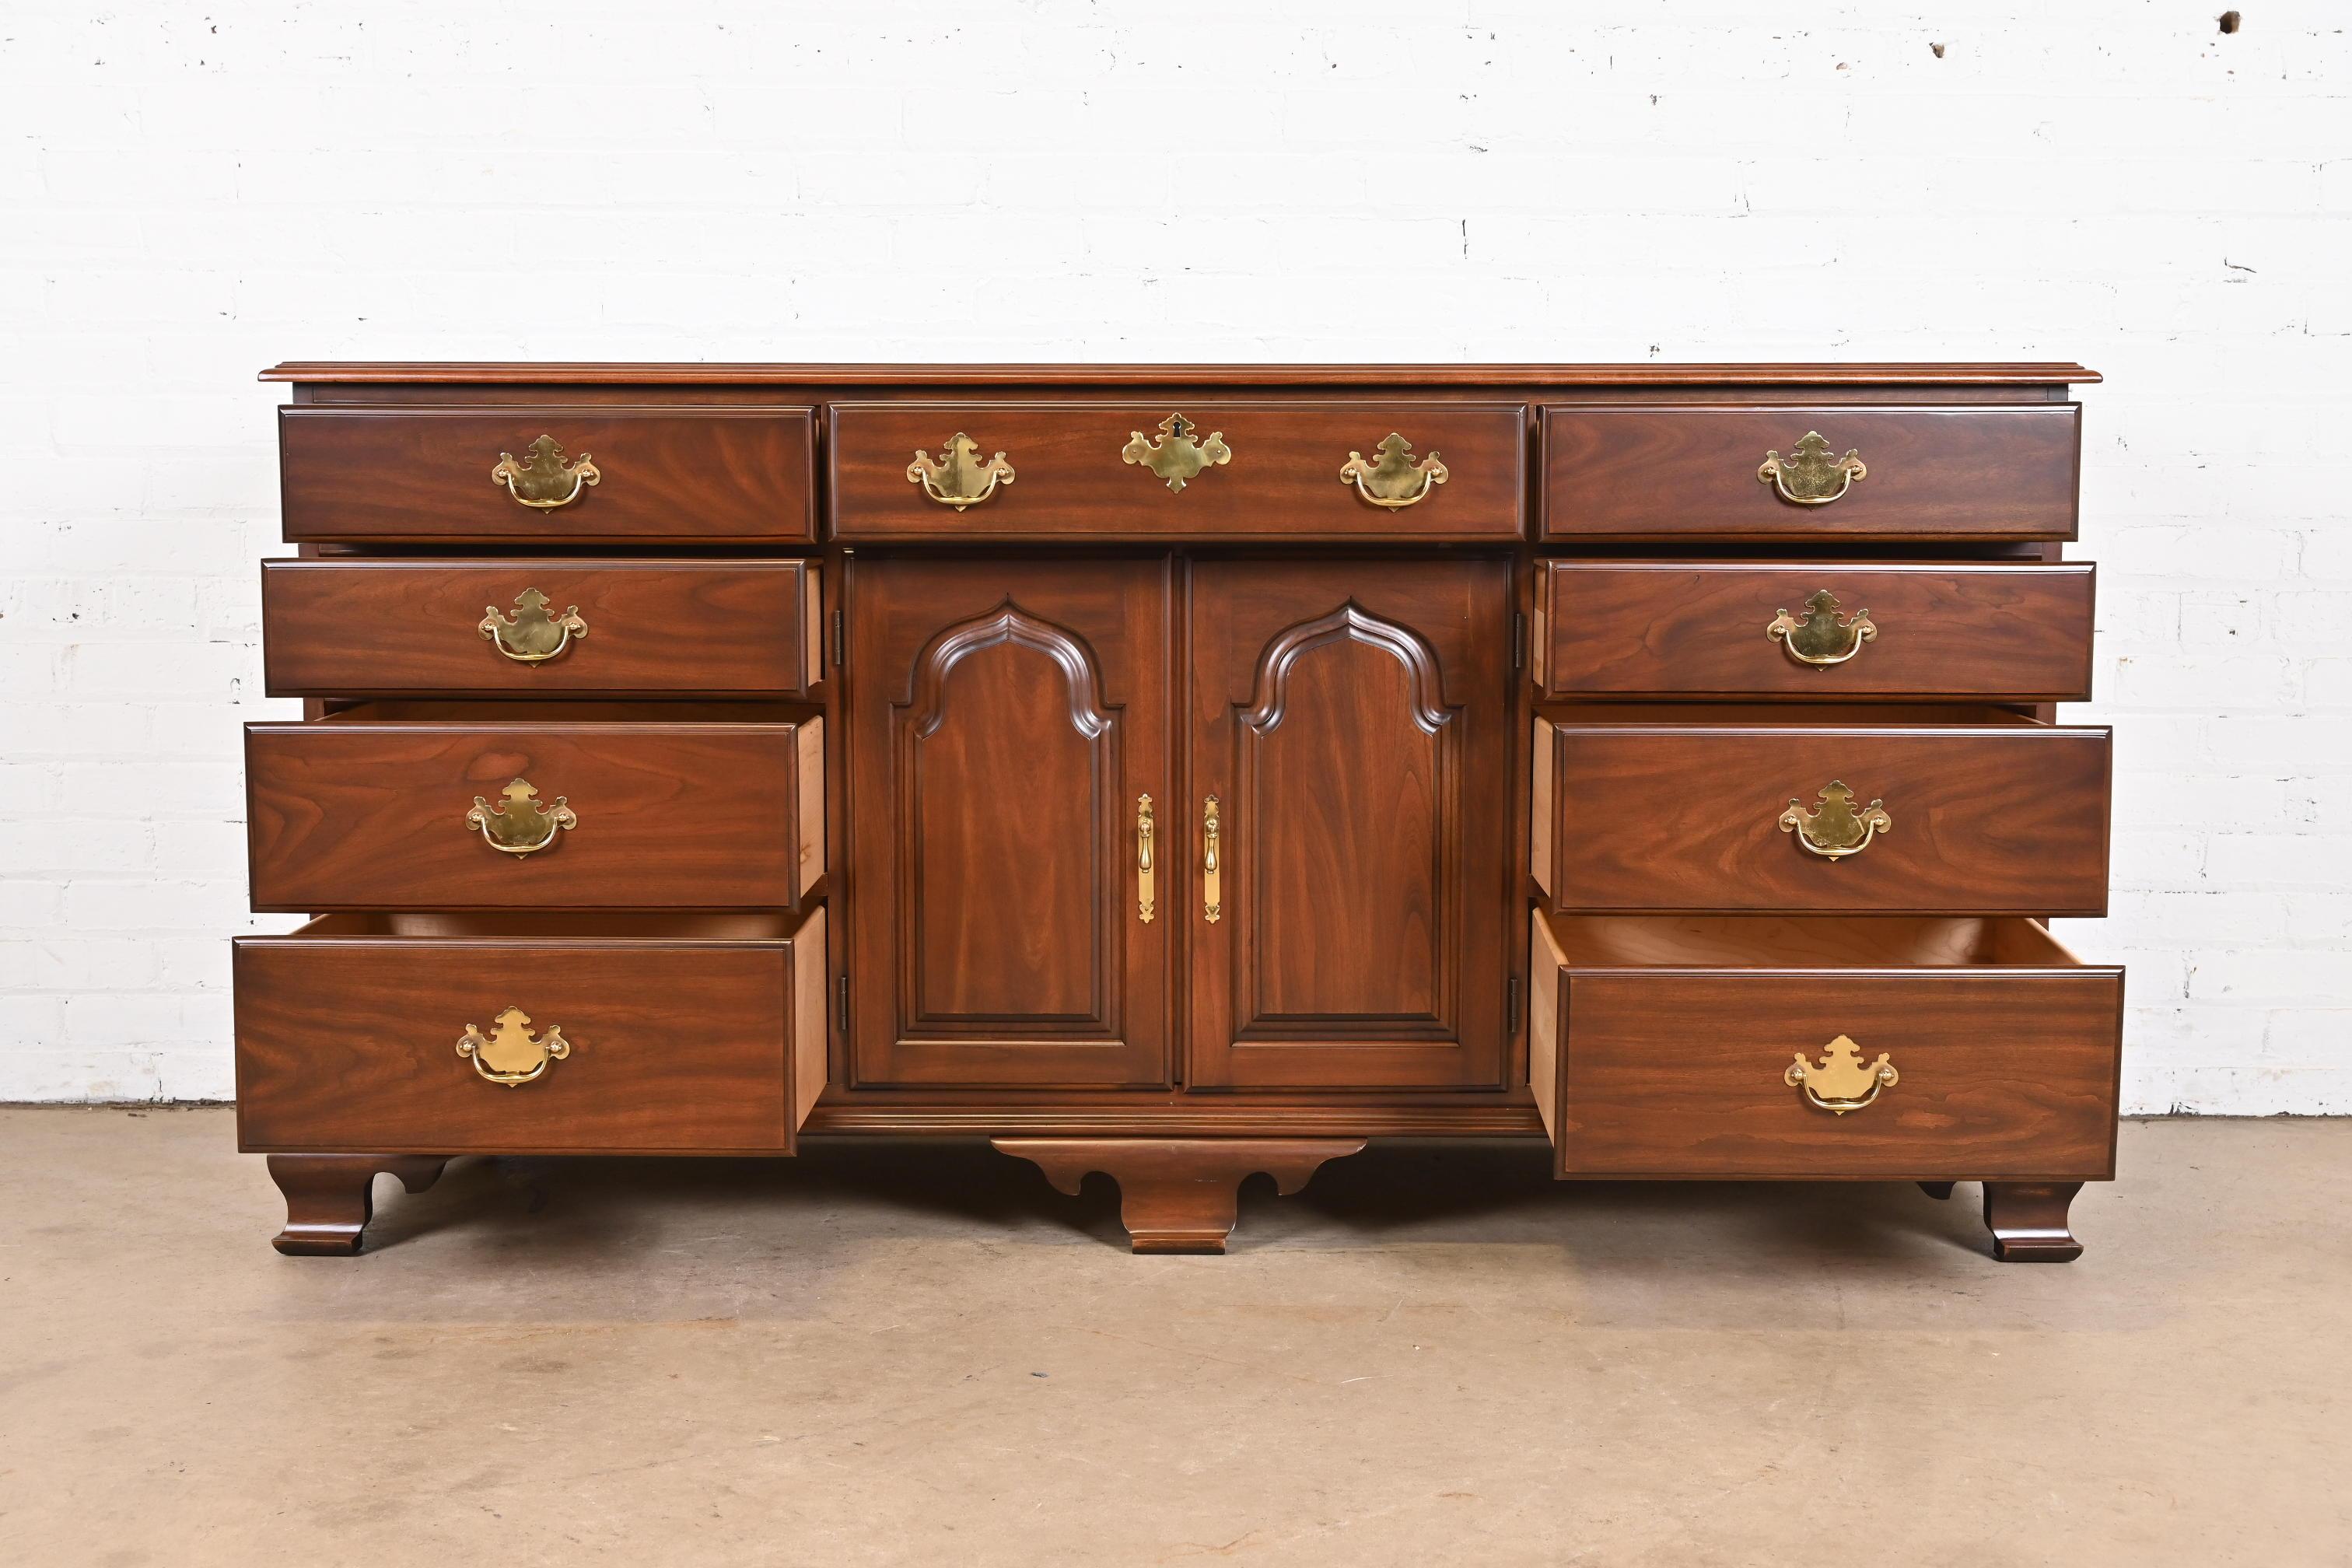 20th Century Harden Furniture Georgian Solid Cherry Wood Long Dresser, Newly Restored For Sale